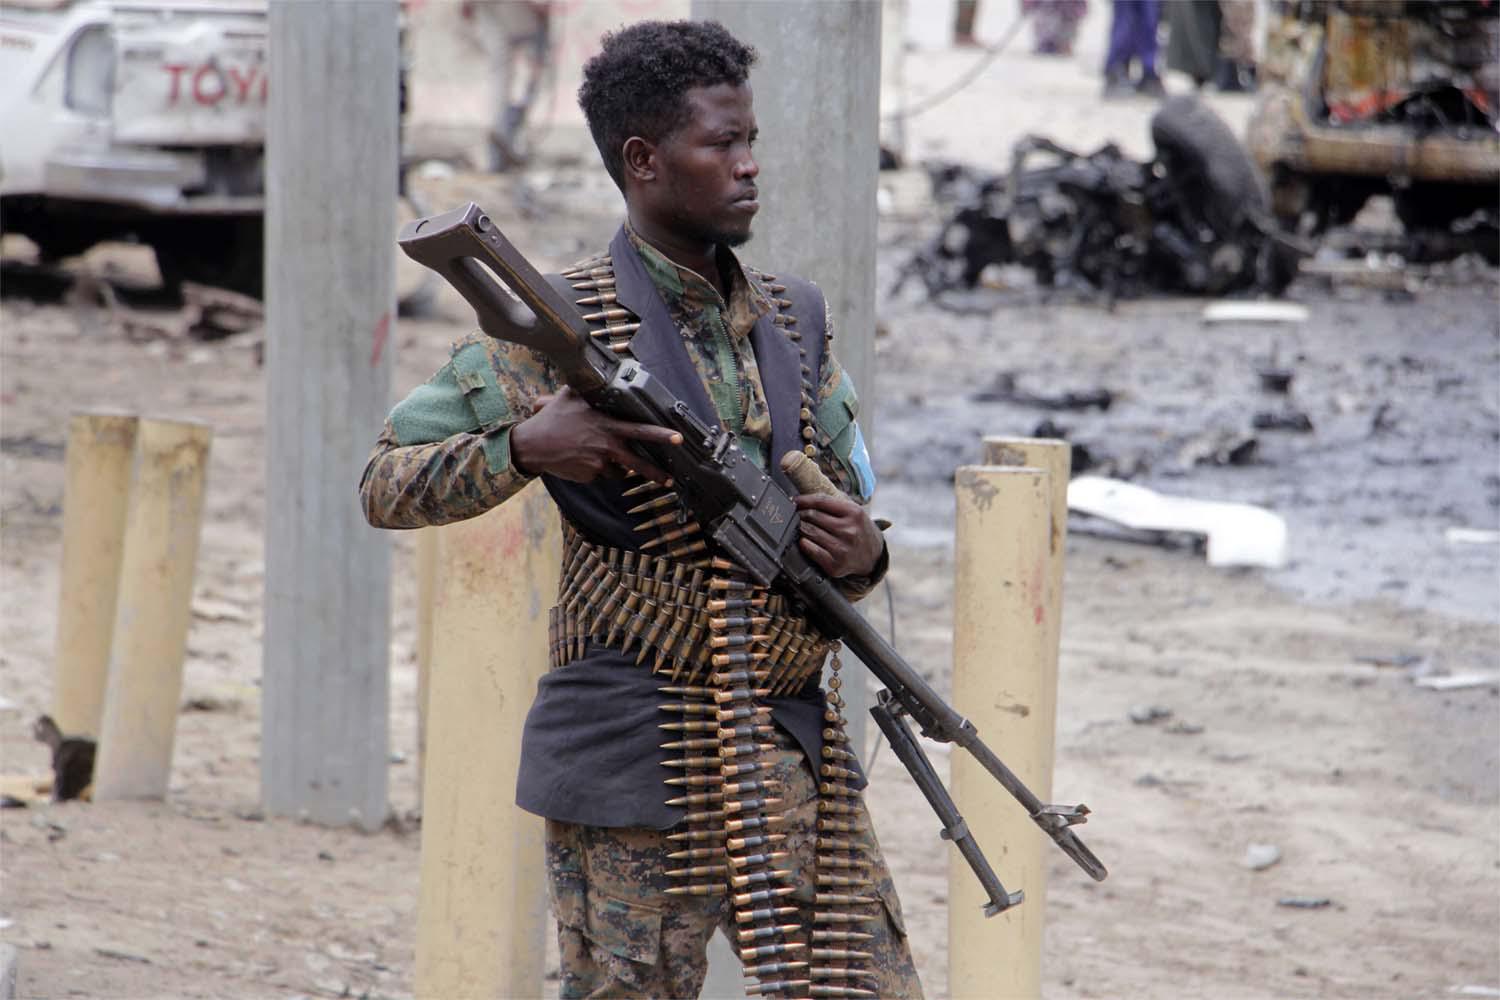 A Somali official said a terrorist attack had caused the explosion